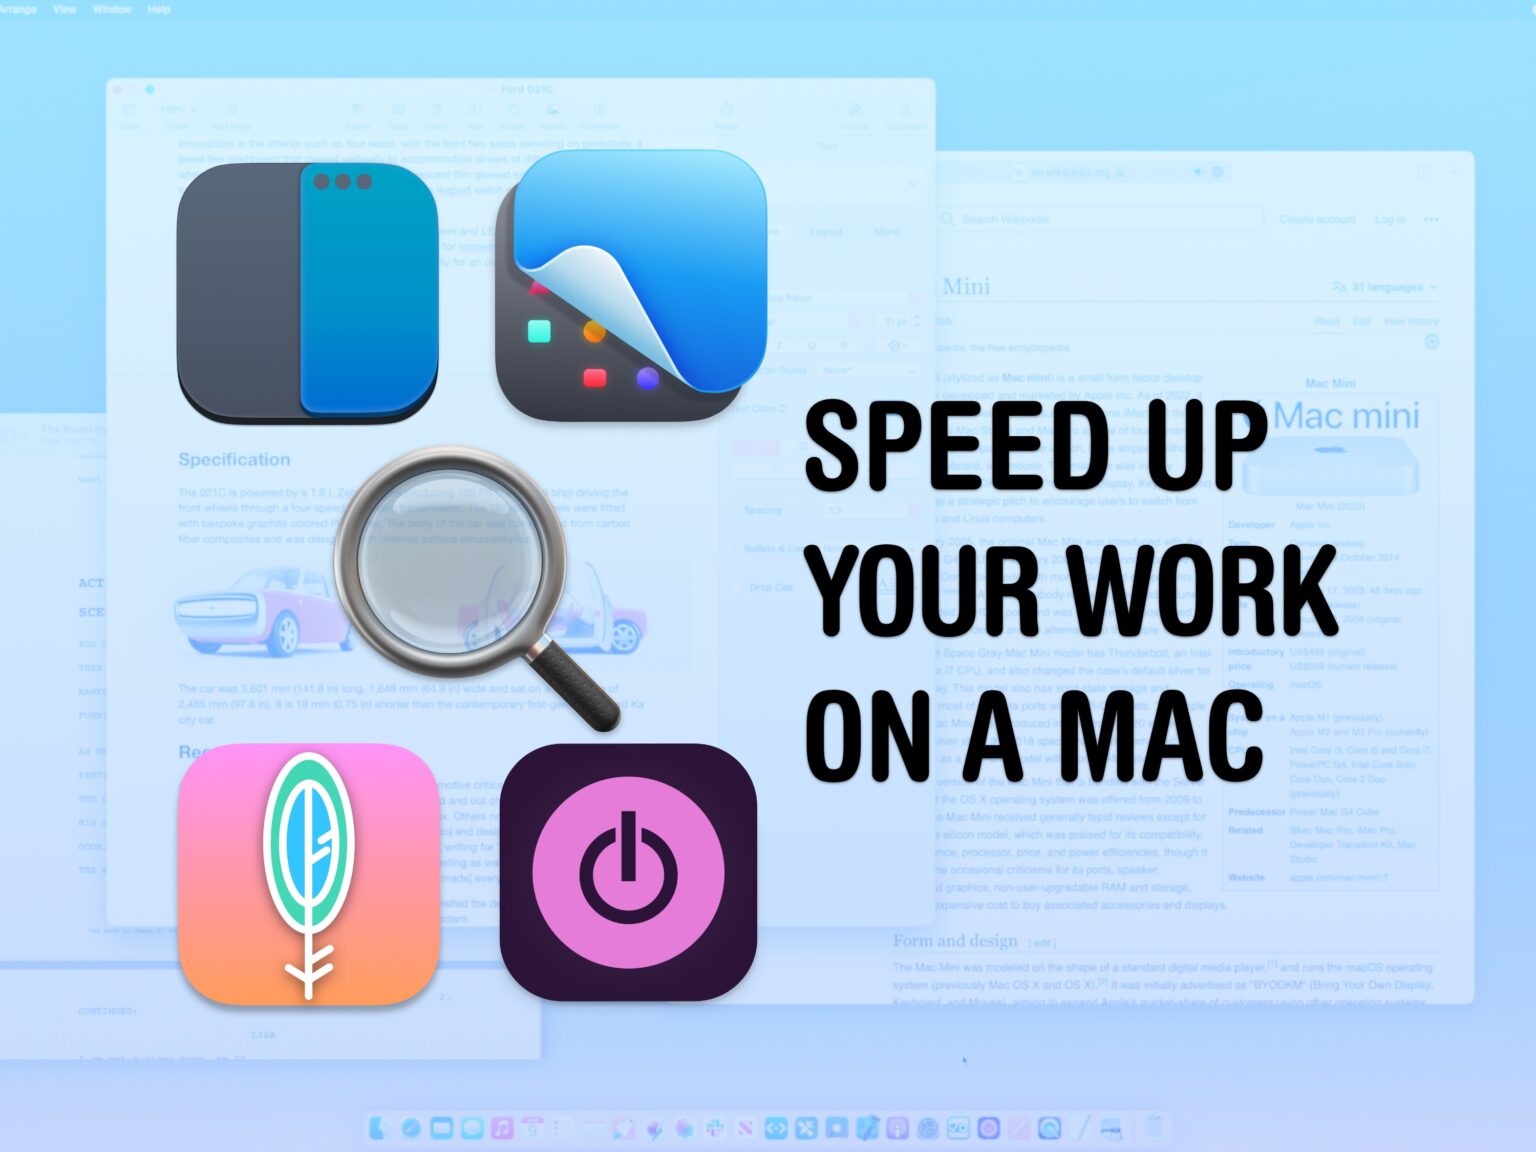 Speed up your work on a Mac